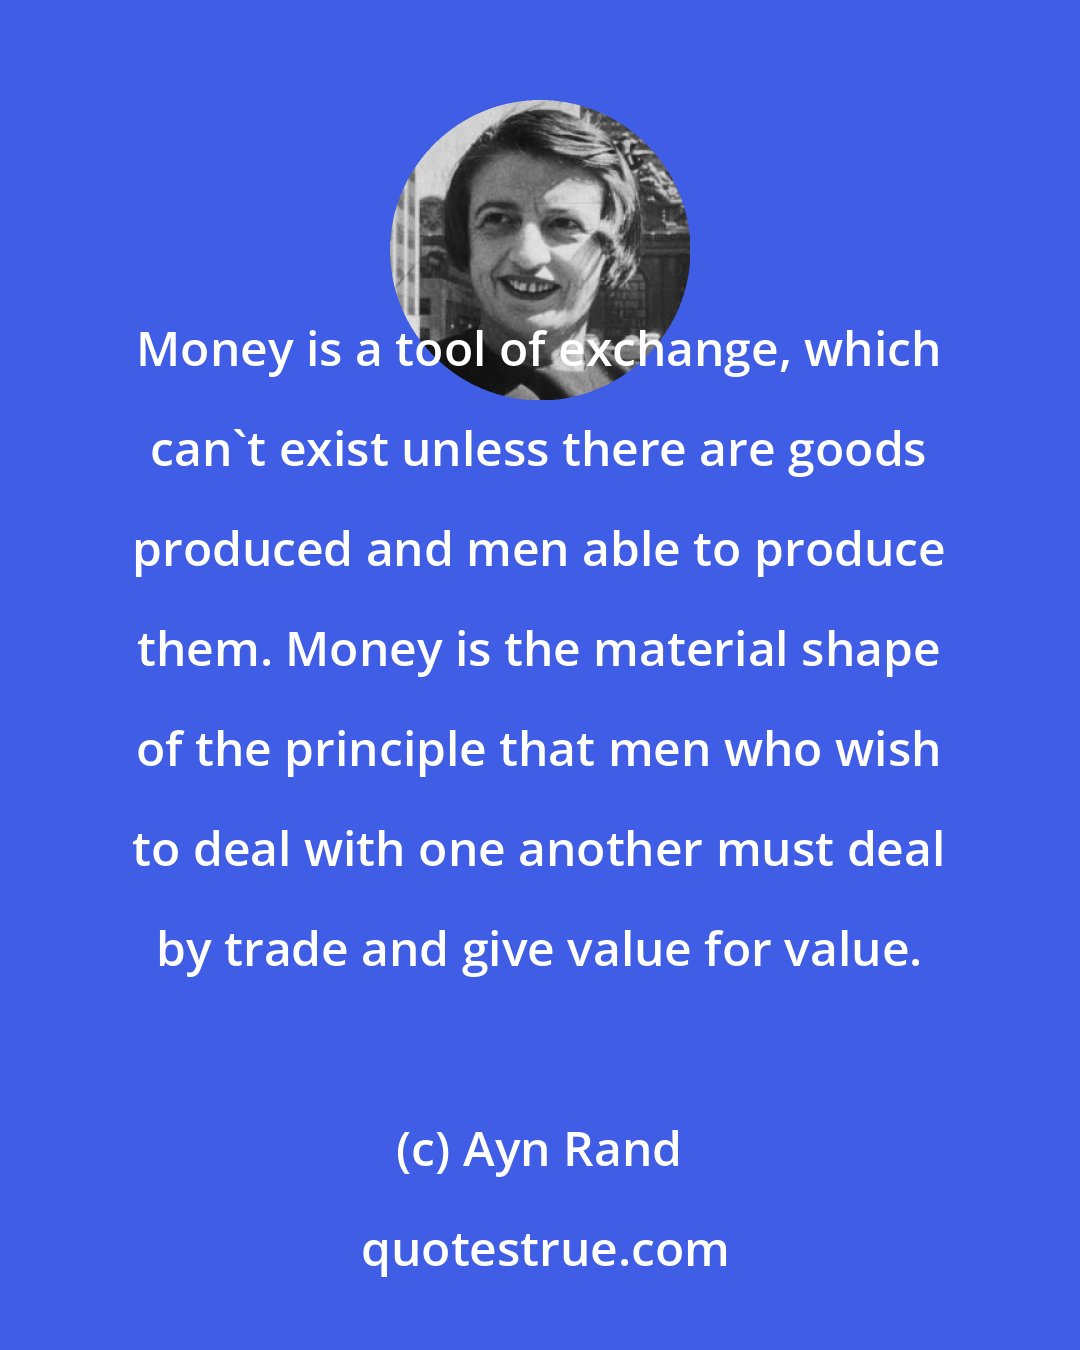 Ayn Rand: Money is a tool of exchange, which can't exist unless there are goods produced and men able to produce them. Money is the material shape of the principle that men who wish to deal with one another must deal by trade and give value for value.